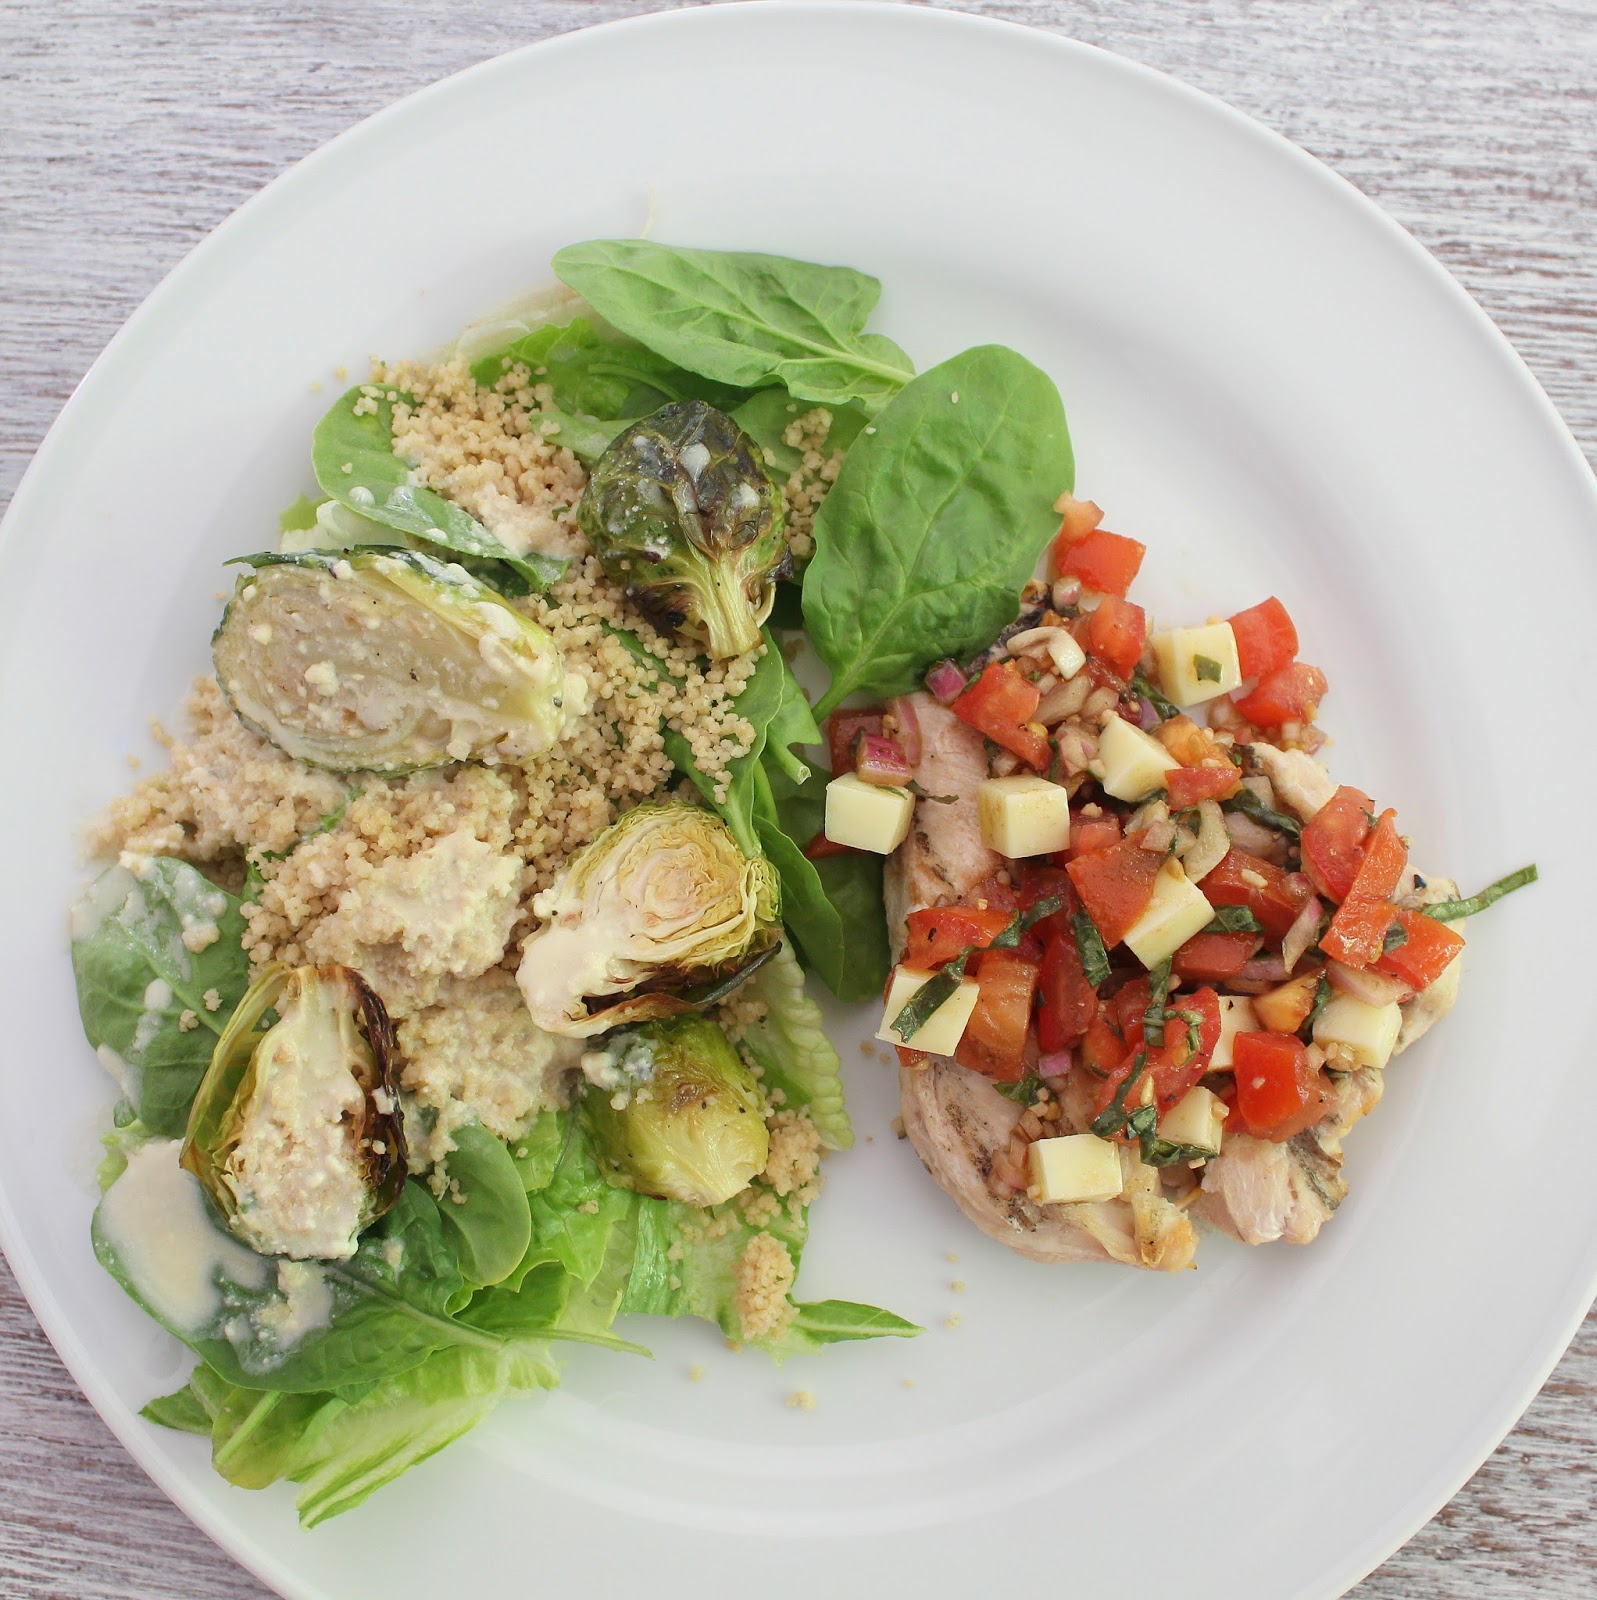 Grilled Chicken Bruschetta With Roasted Brussels Sprouts and Couscous Salad